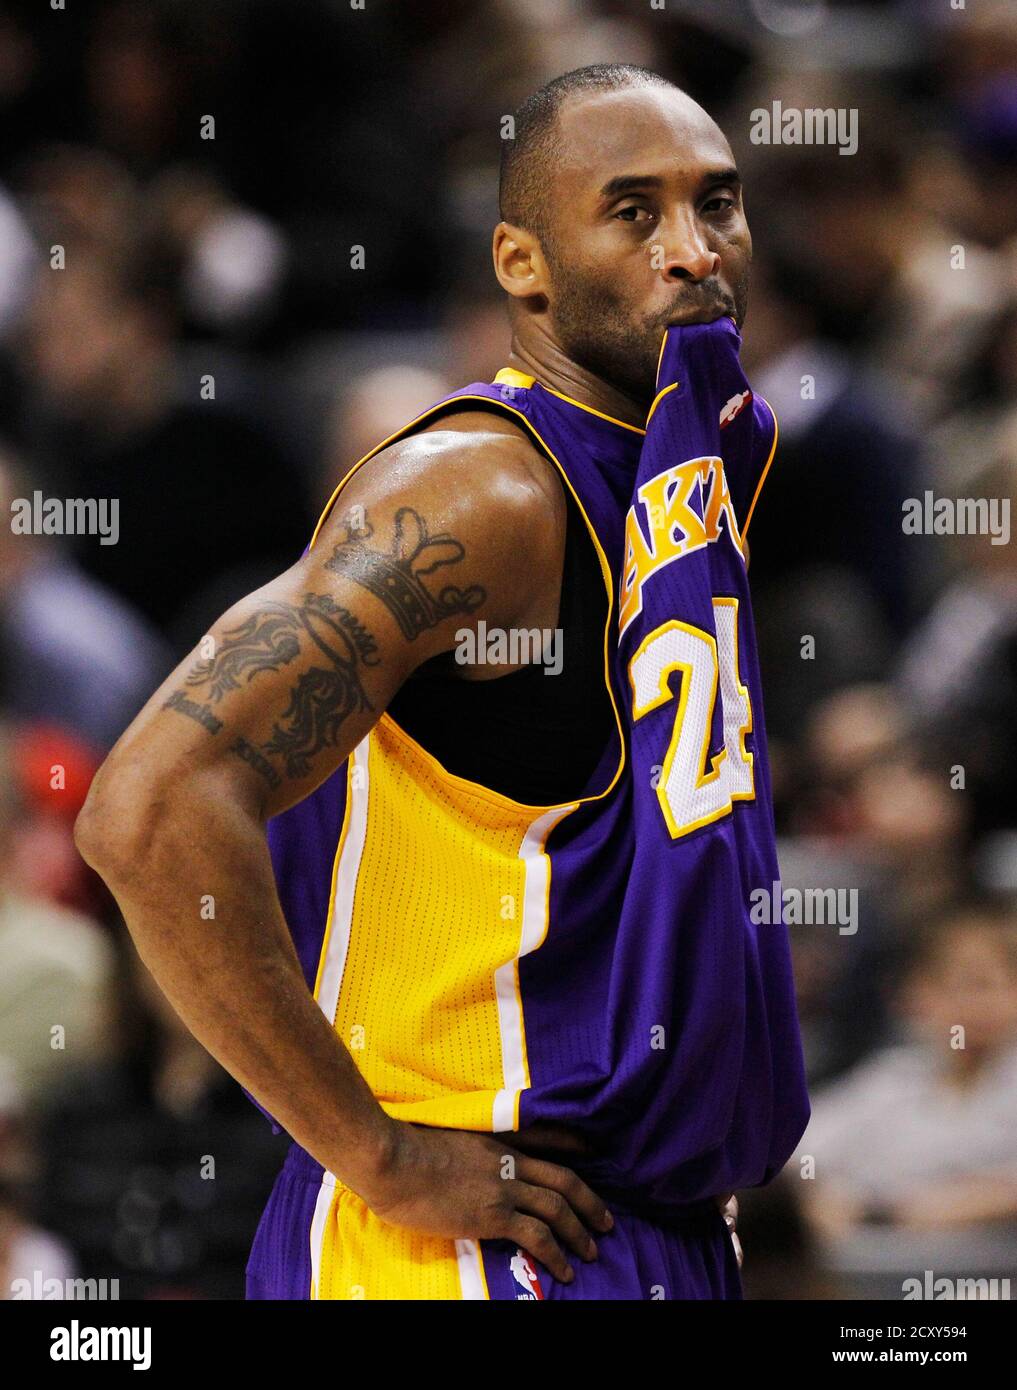 kobe bryant jersey in mouth